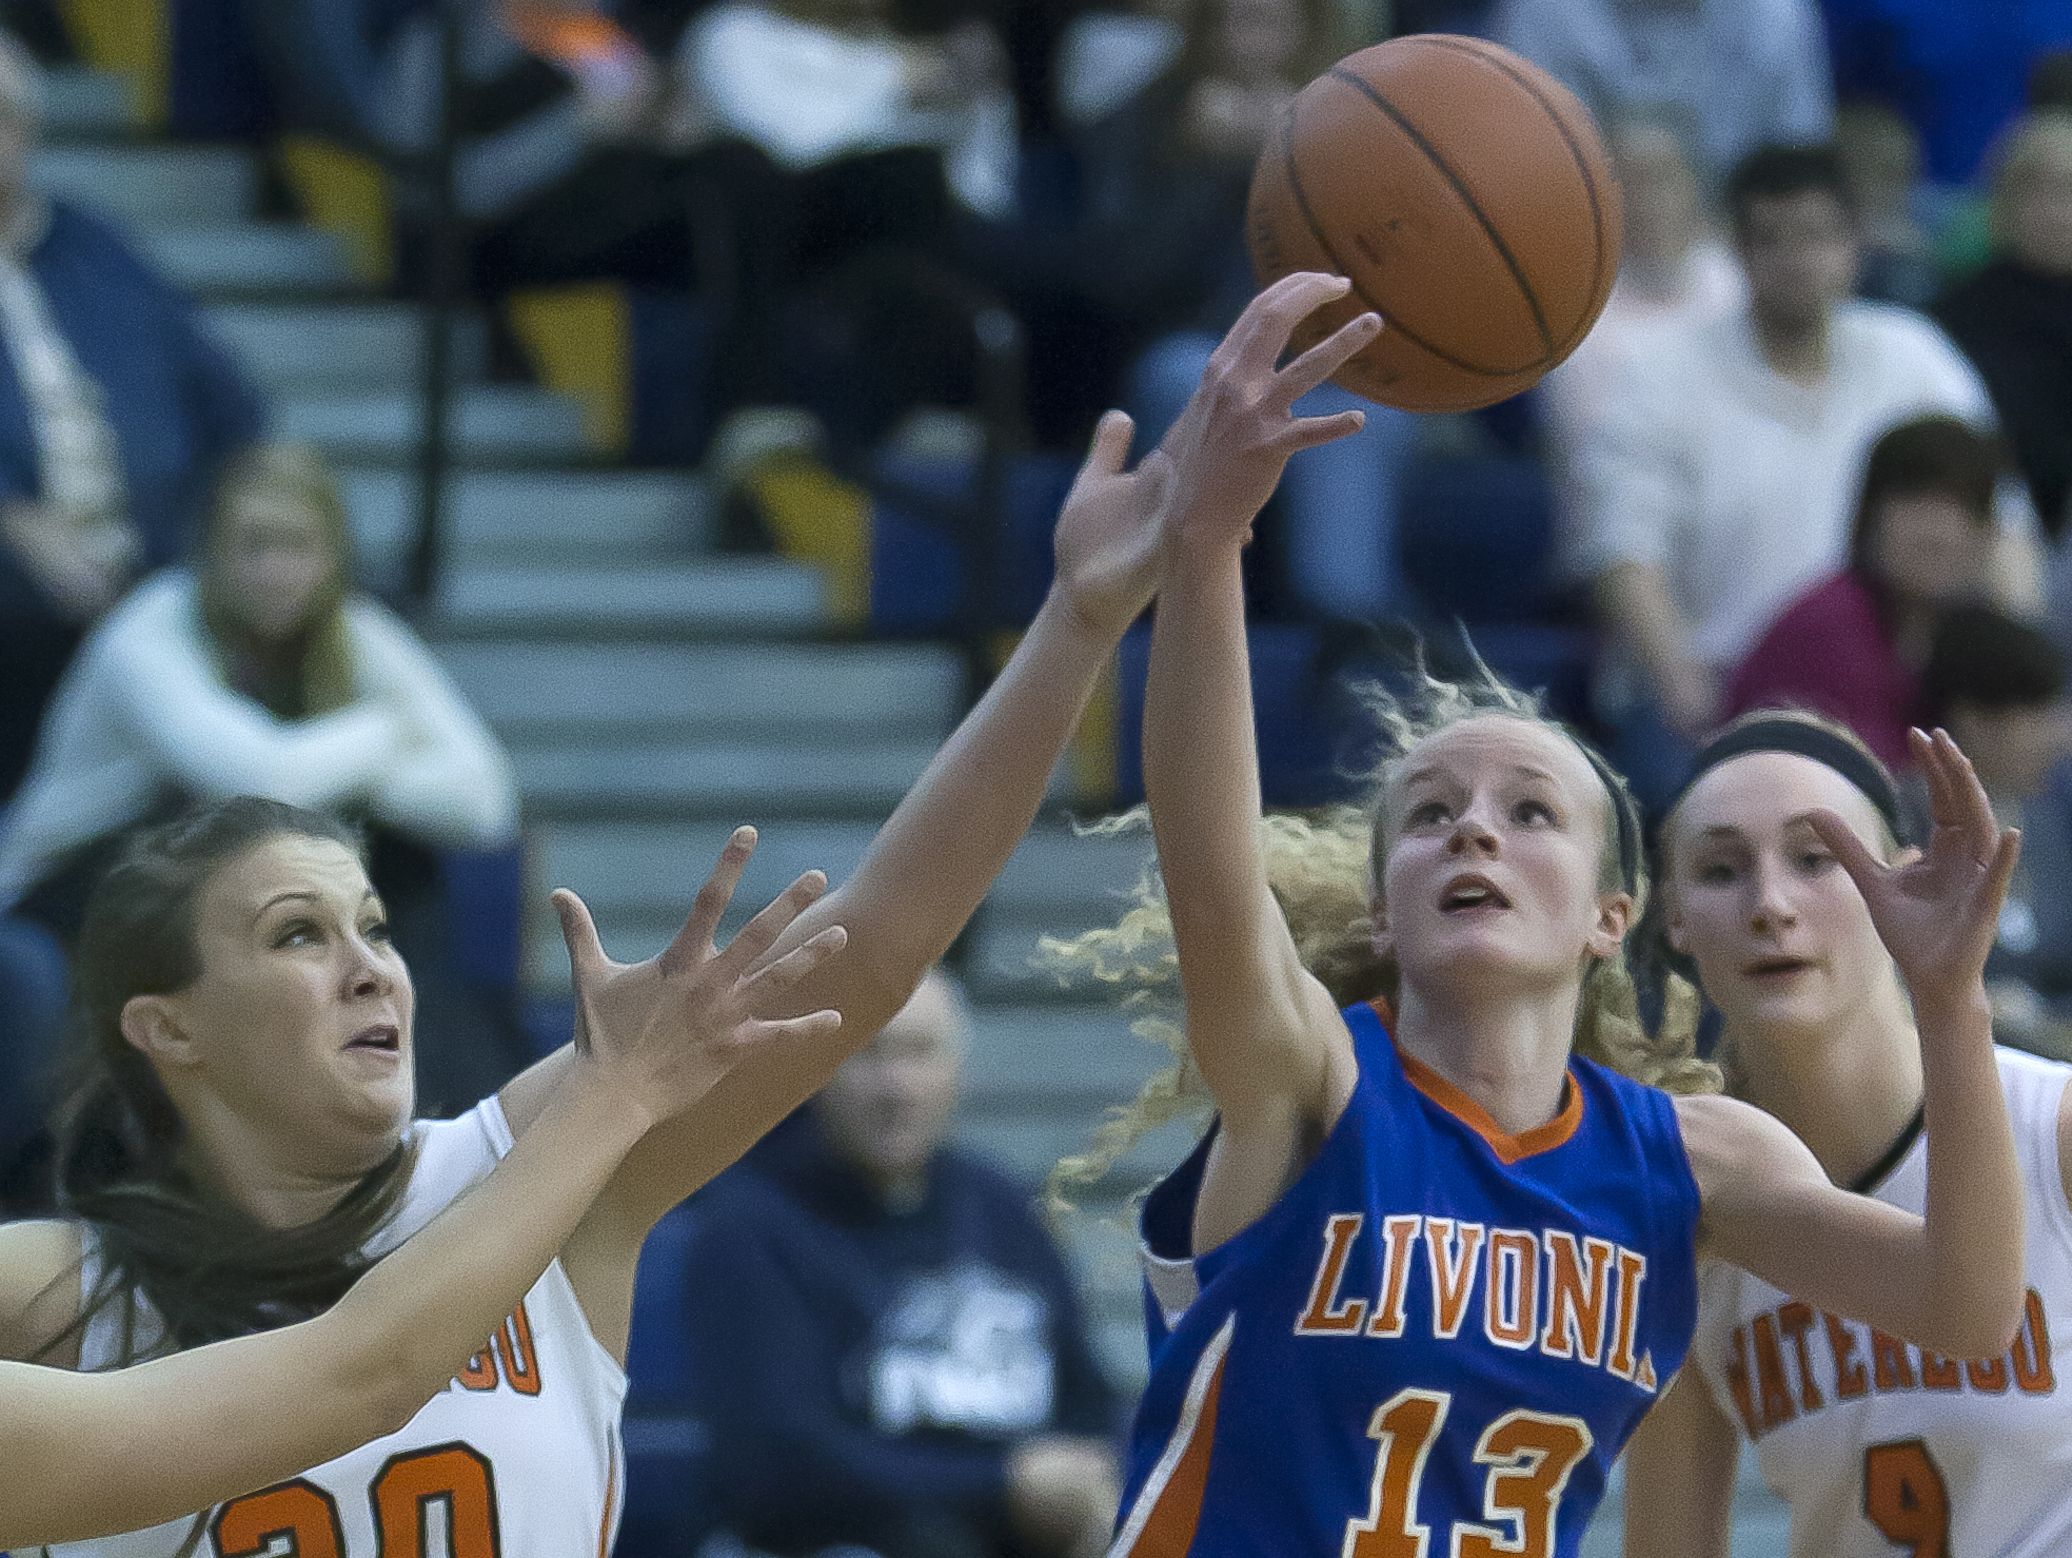 Livonia's Molly Stewart, wearing No. 13, leads the Bulldogs with 15.3 points per game.